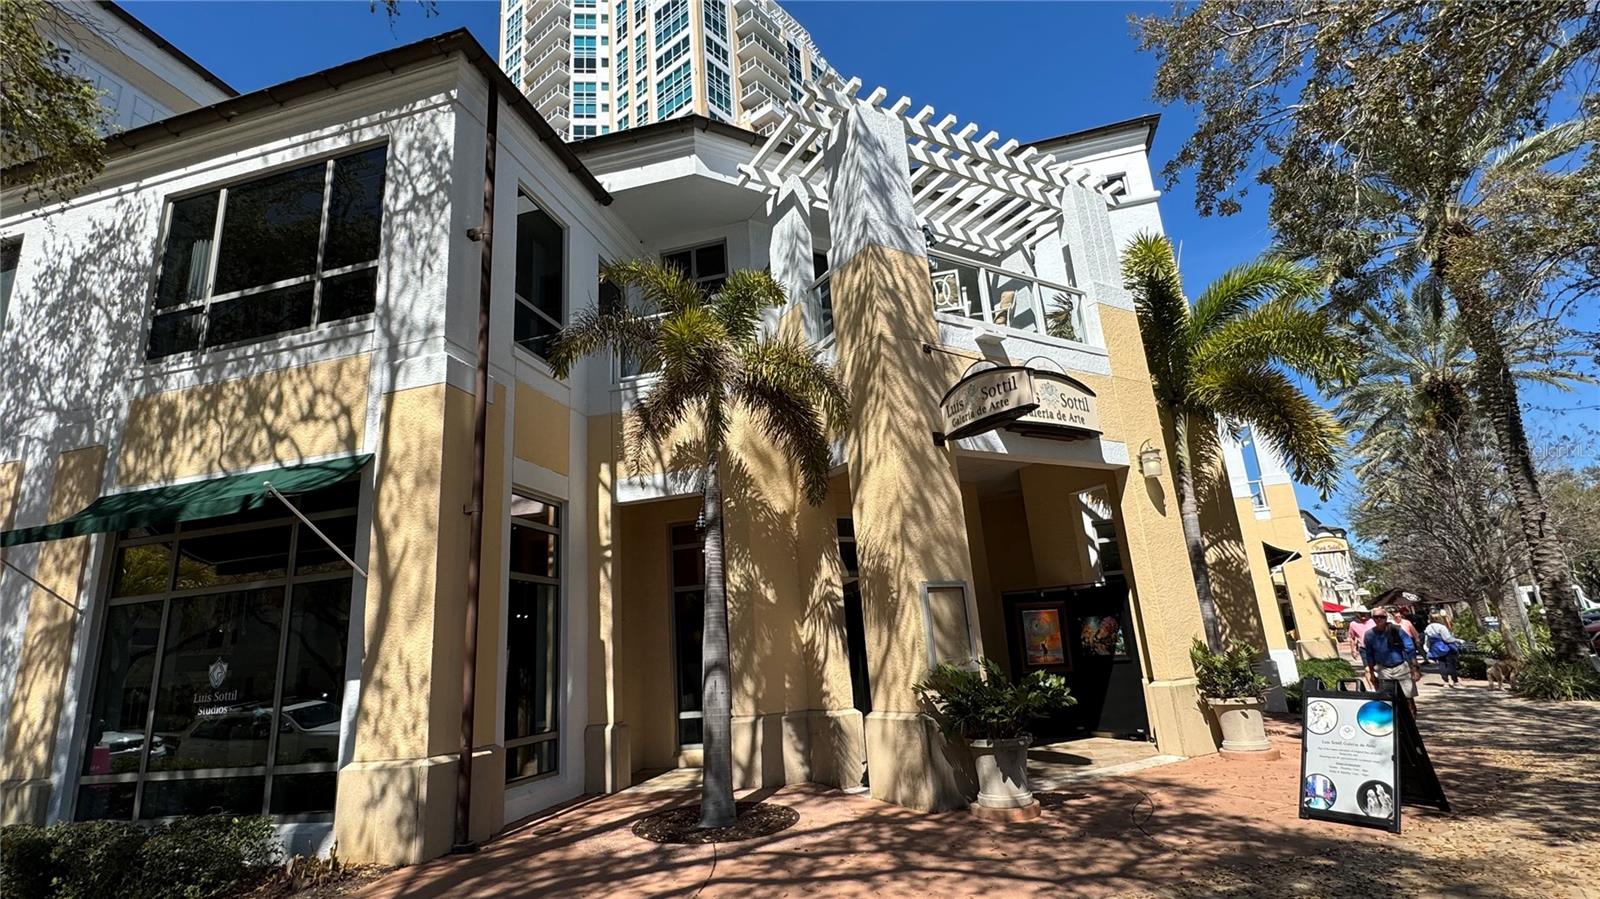 From this St Petersburg home, you are mere minutes from so many art venues! This art gallery is one of several you will find all over downtown St Petersburg.